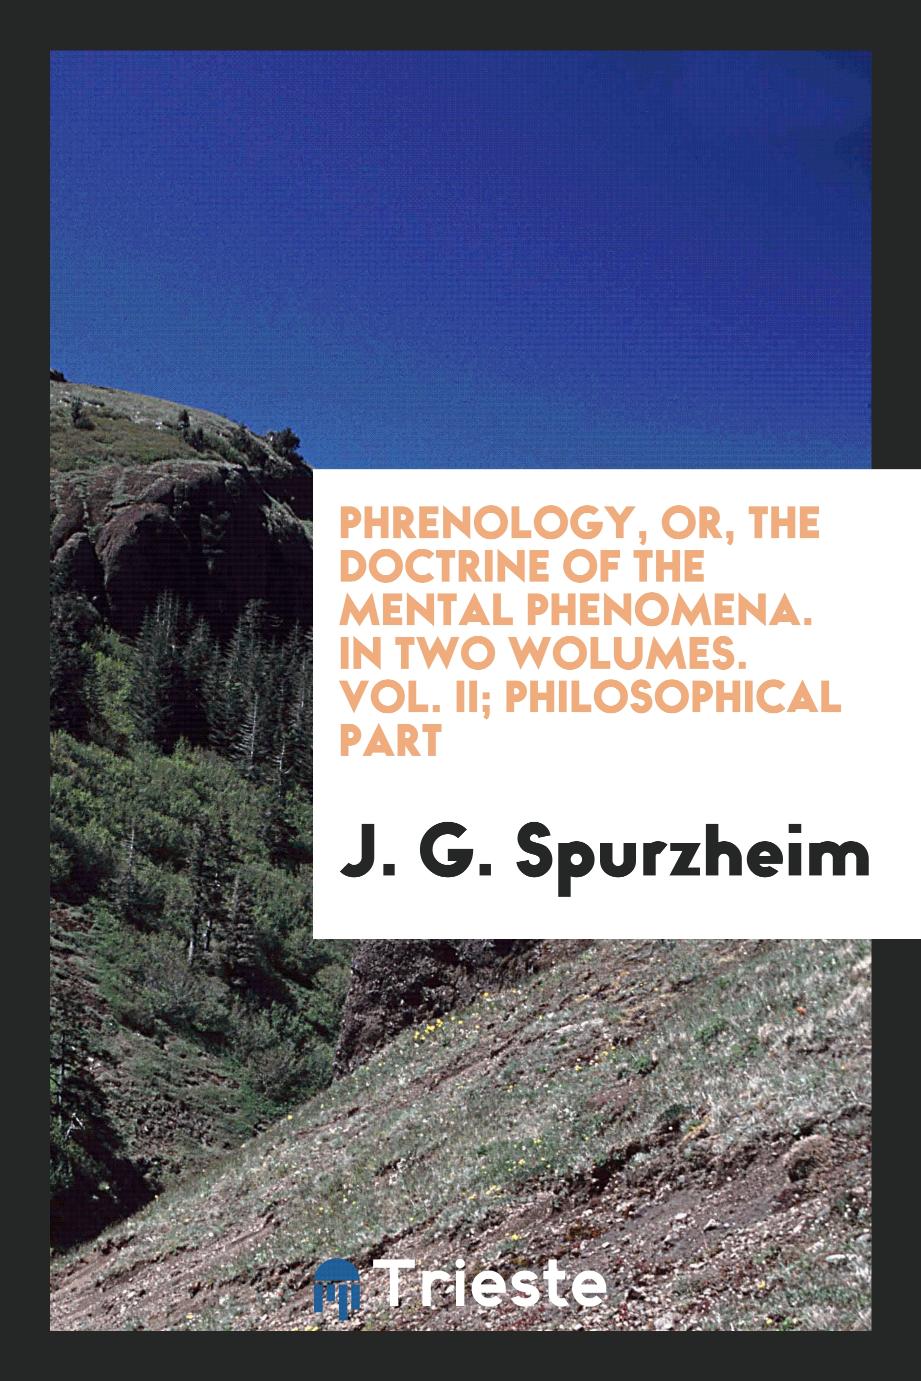 Phrenology, or, The doctrine of the mental phenomena. In two wolumes. Vol. II; Philosophical part